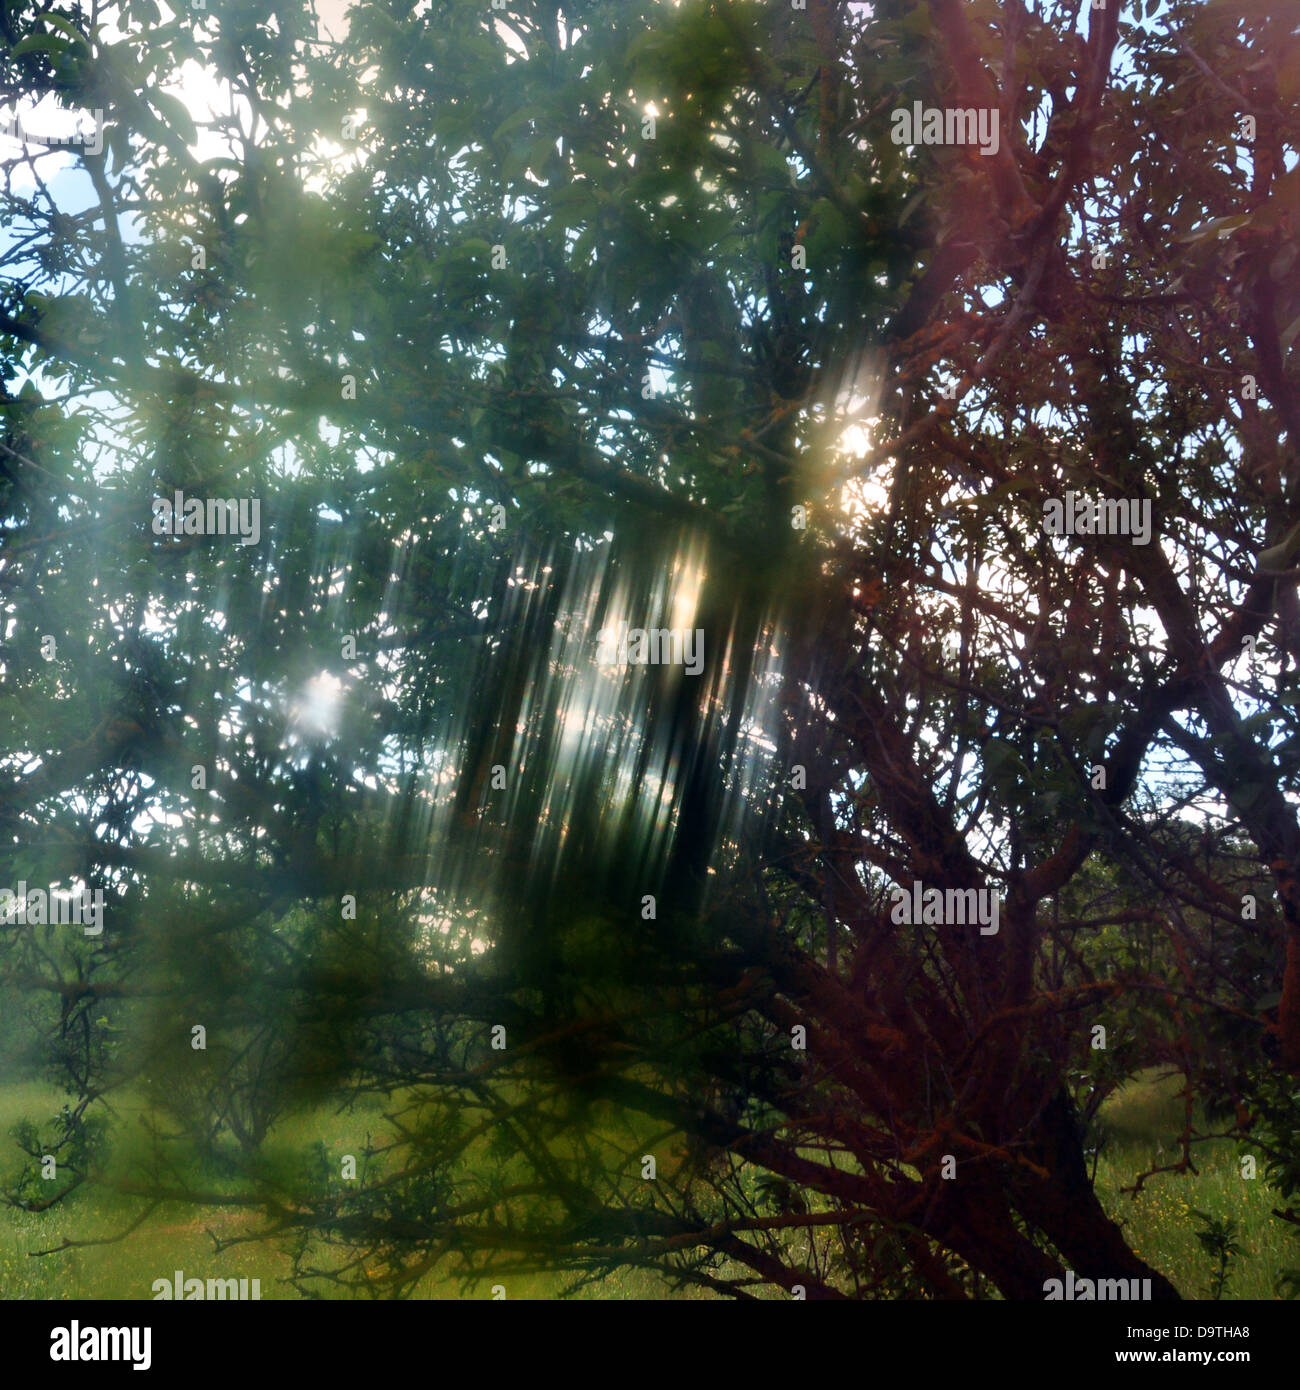 Light streaks through tree branches on sunny spring day. Painted glass distortion. Stock Photo